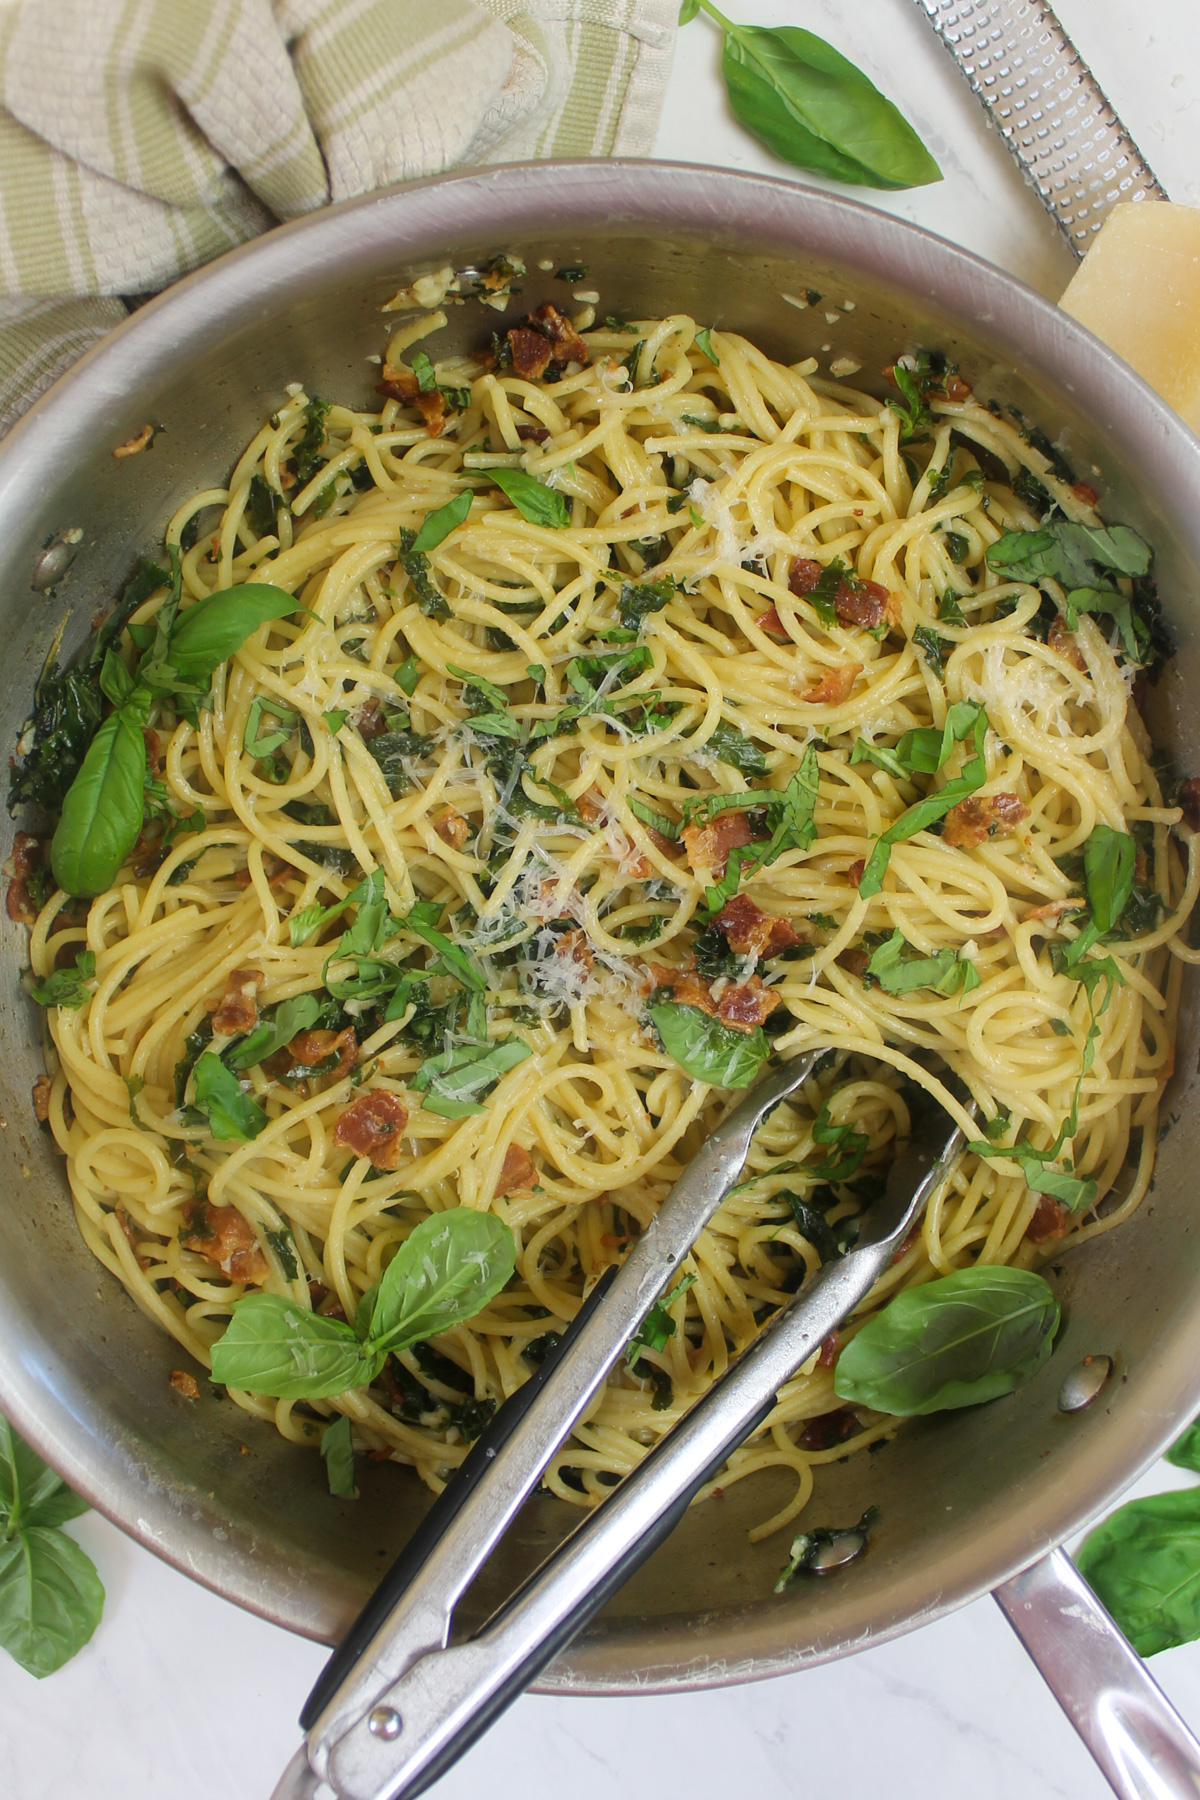 The finished Bacon Kale Spaghetti with basil and Parmesan cheese.